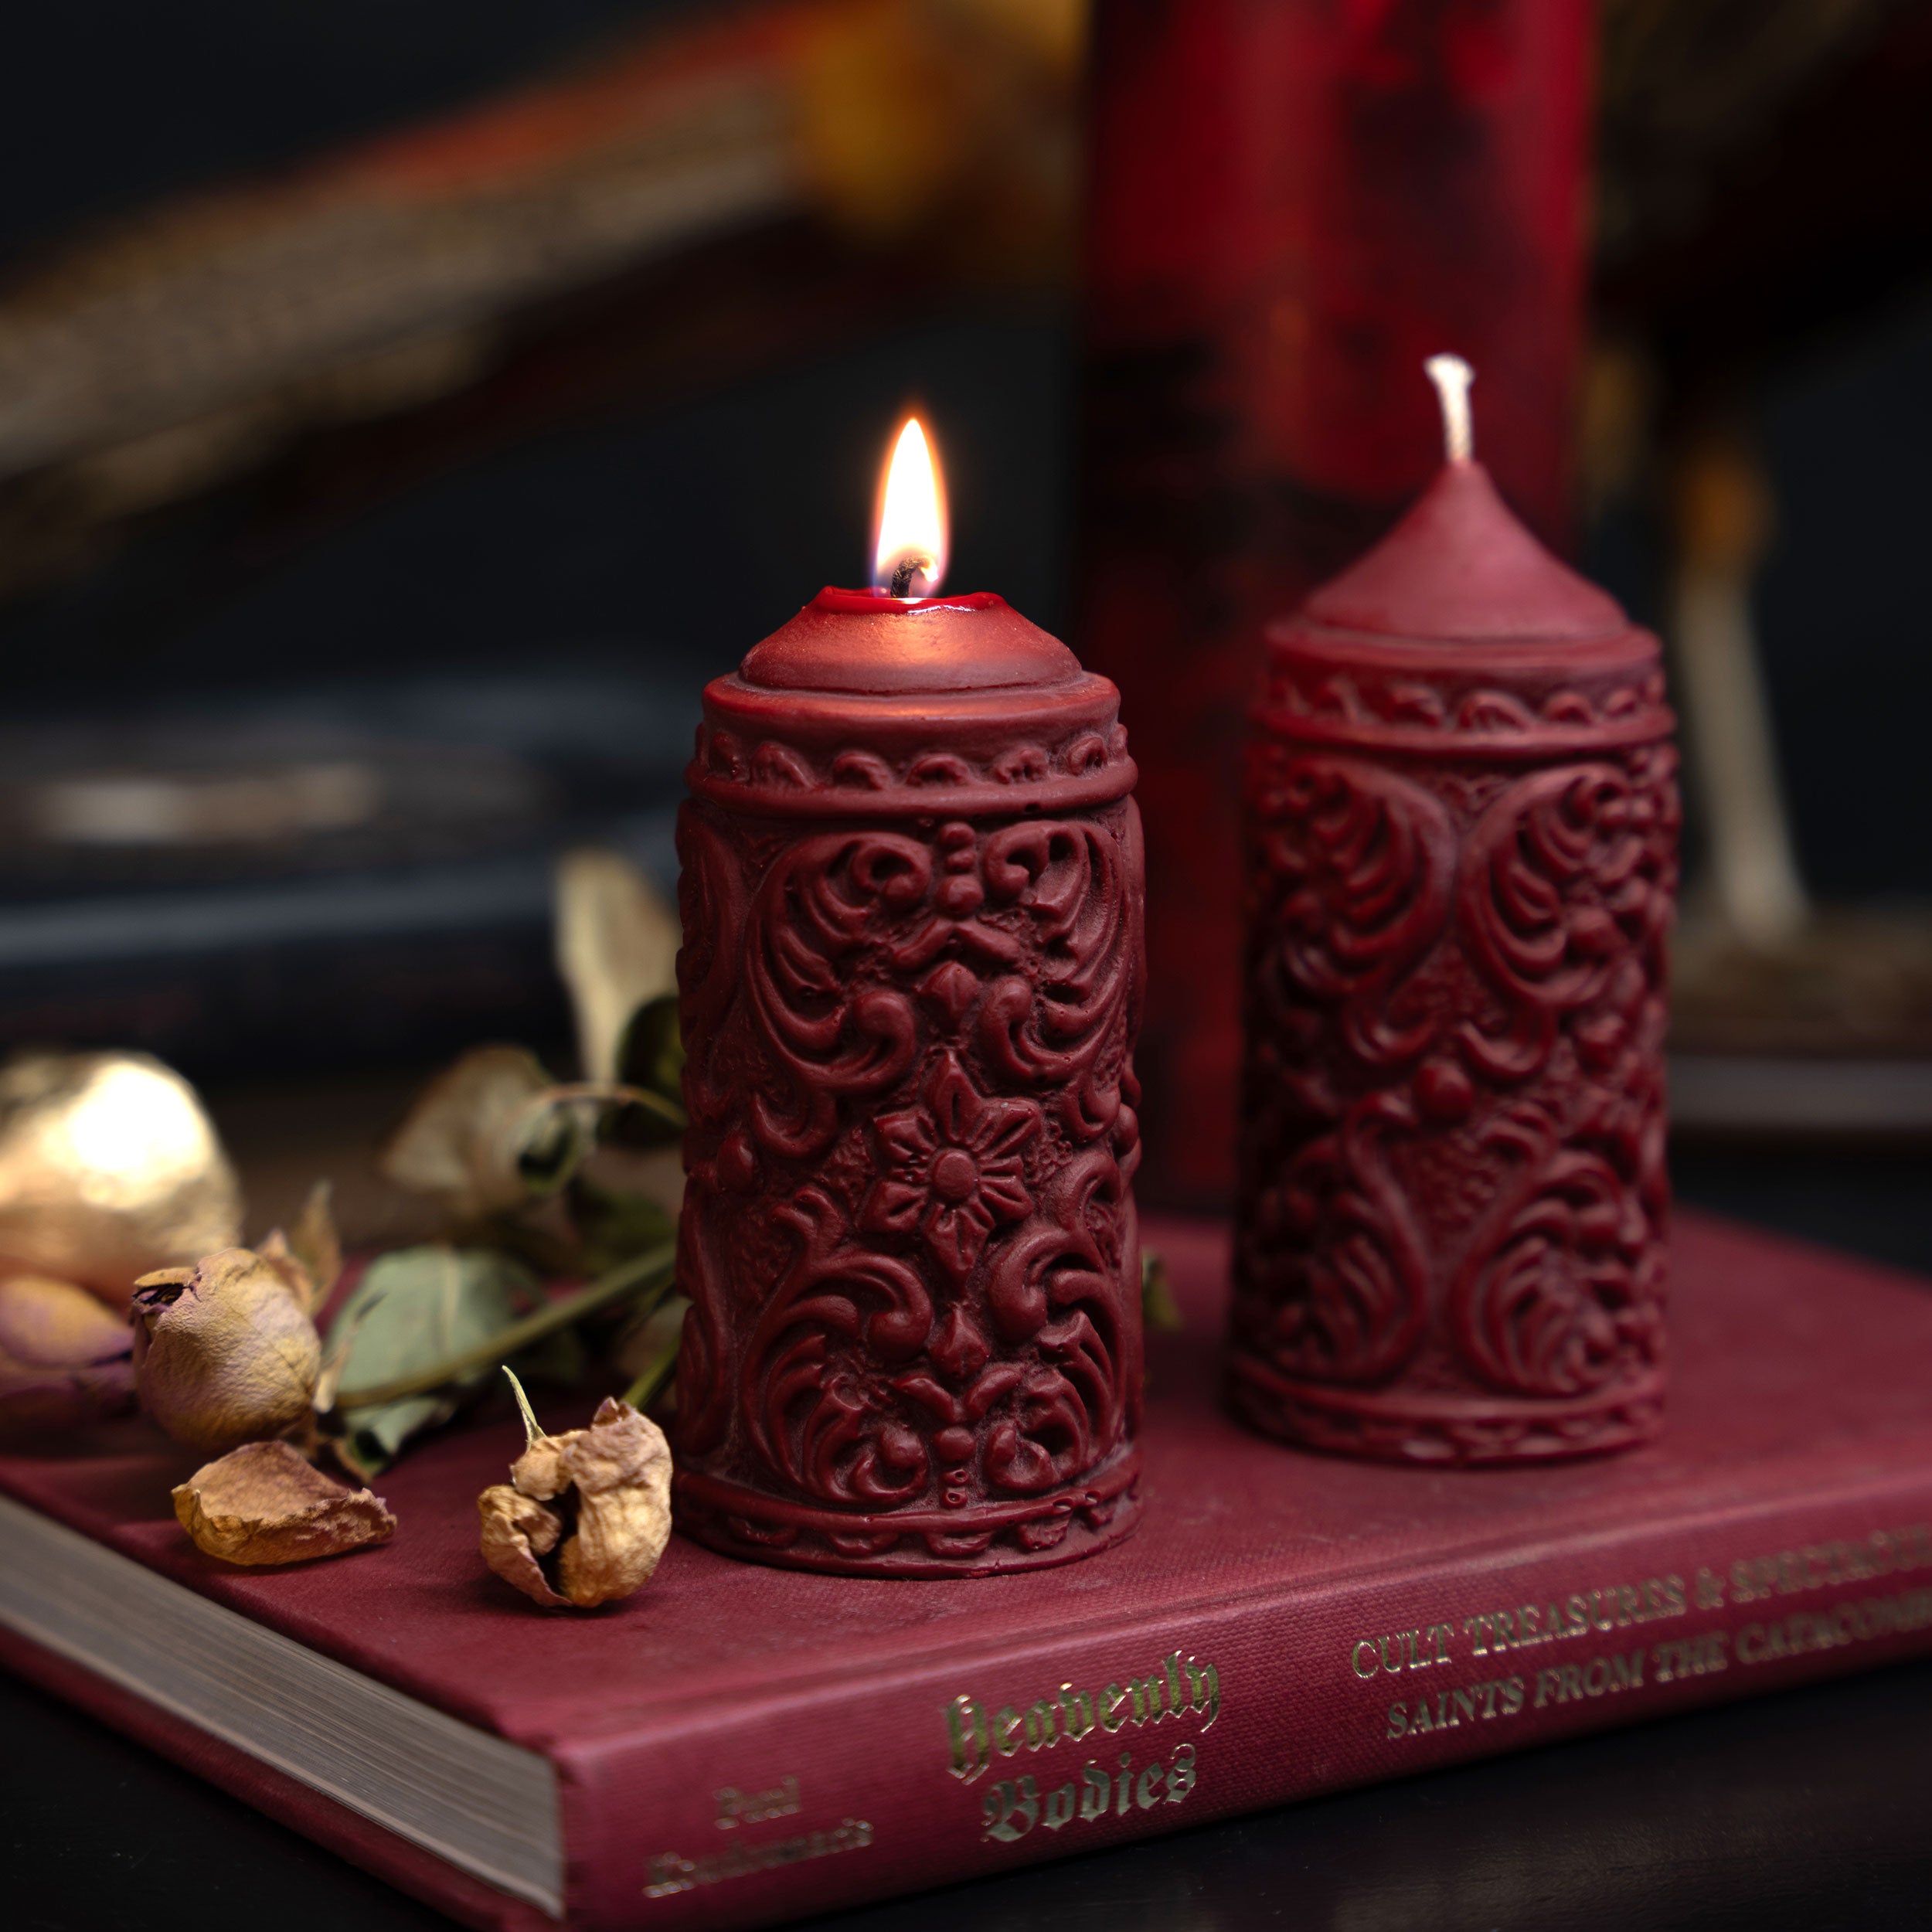 Mildred gothic candle - Crimson red - The Blackened teeth